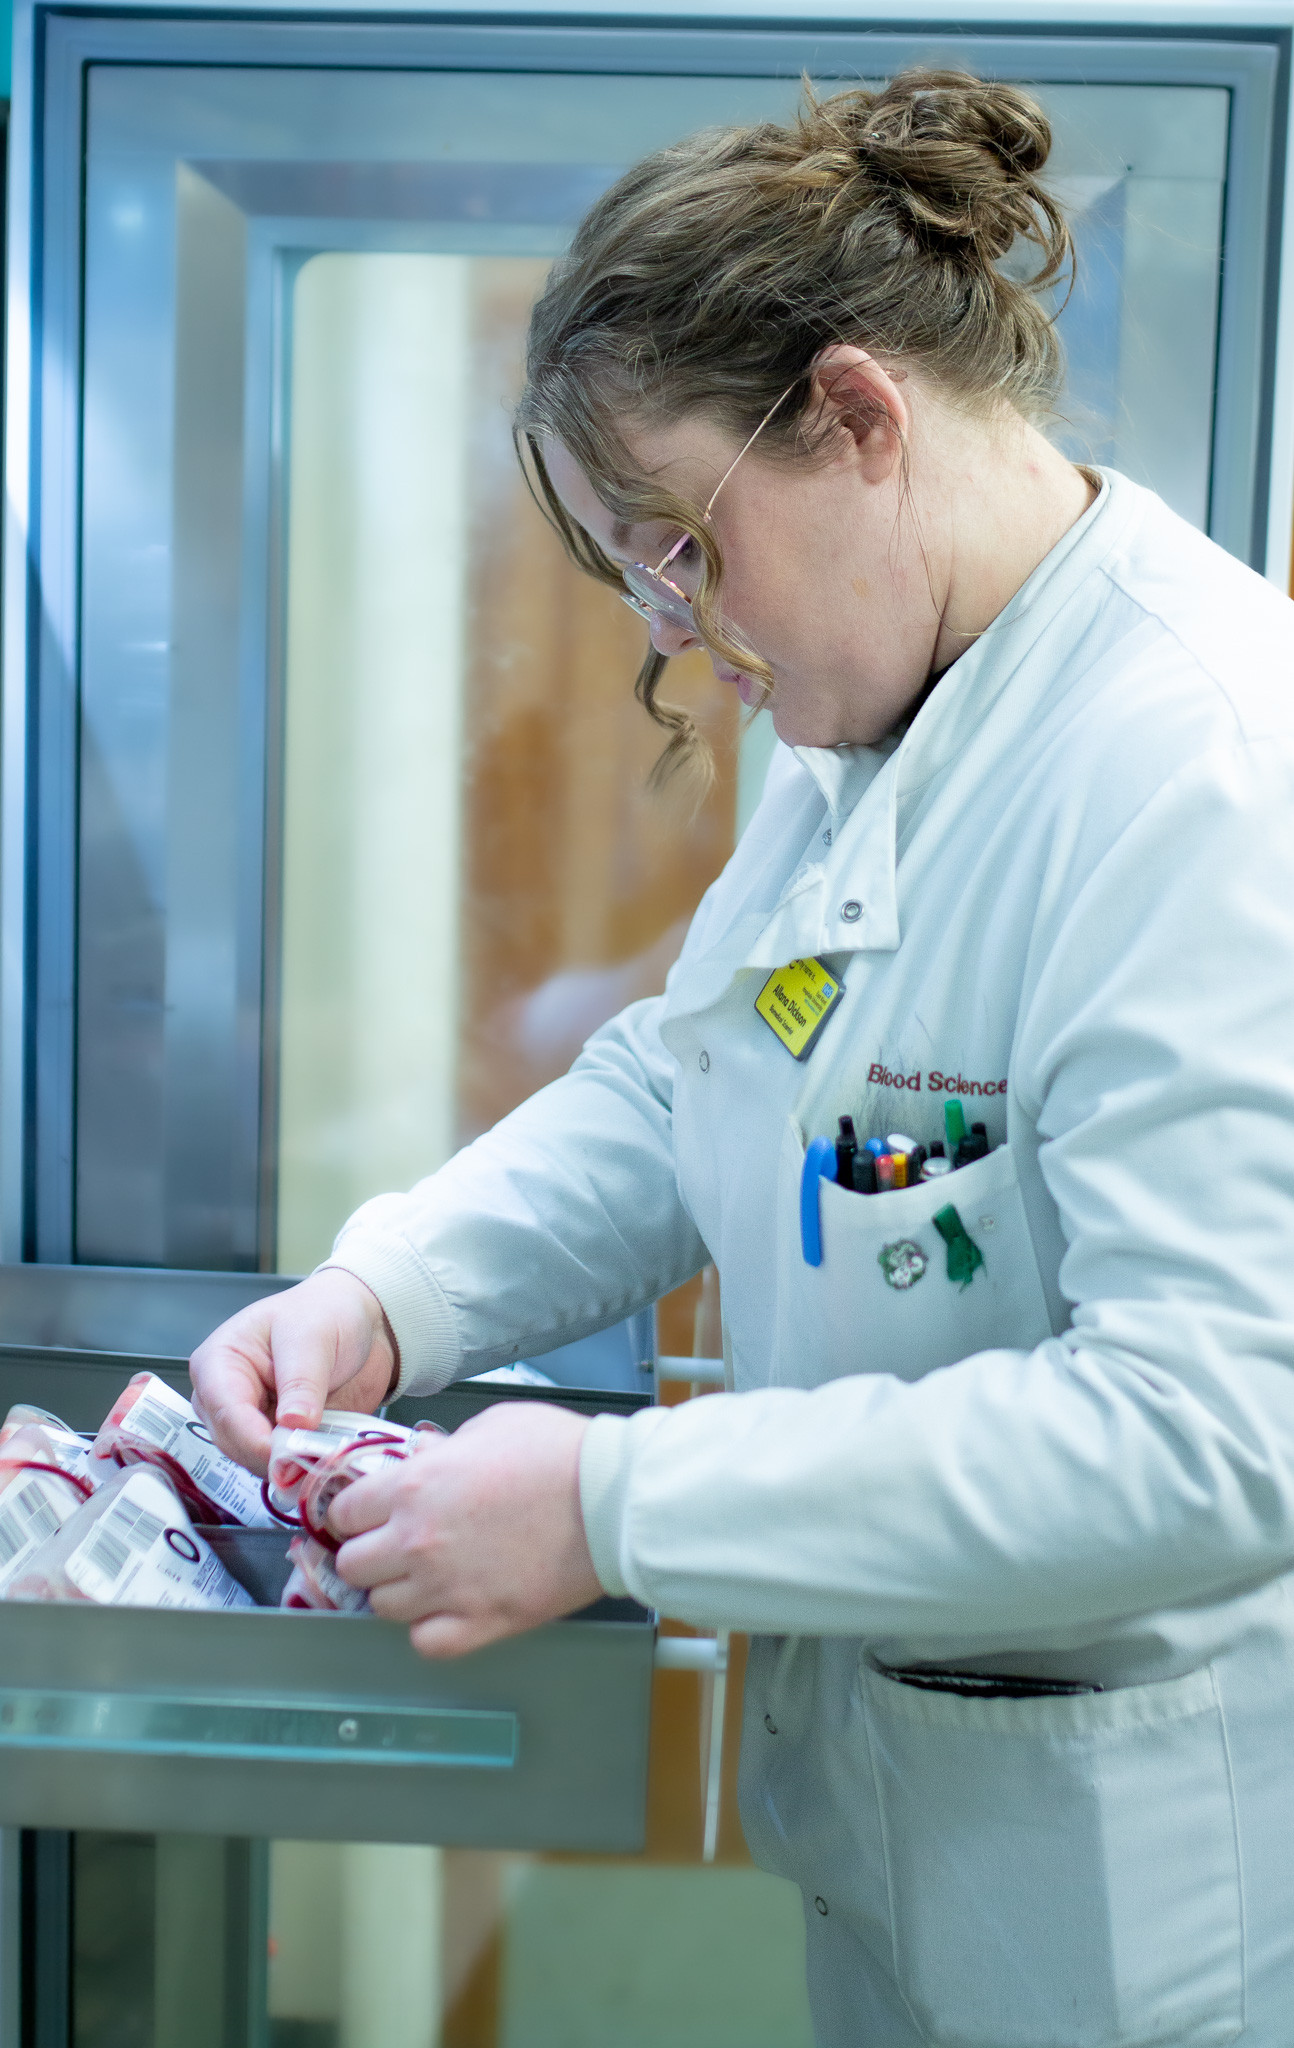 Allana Dickson. She is pictured removing a blood bag from a fridge, wearing a white lab coat and yellow name badge